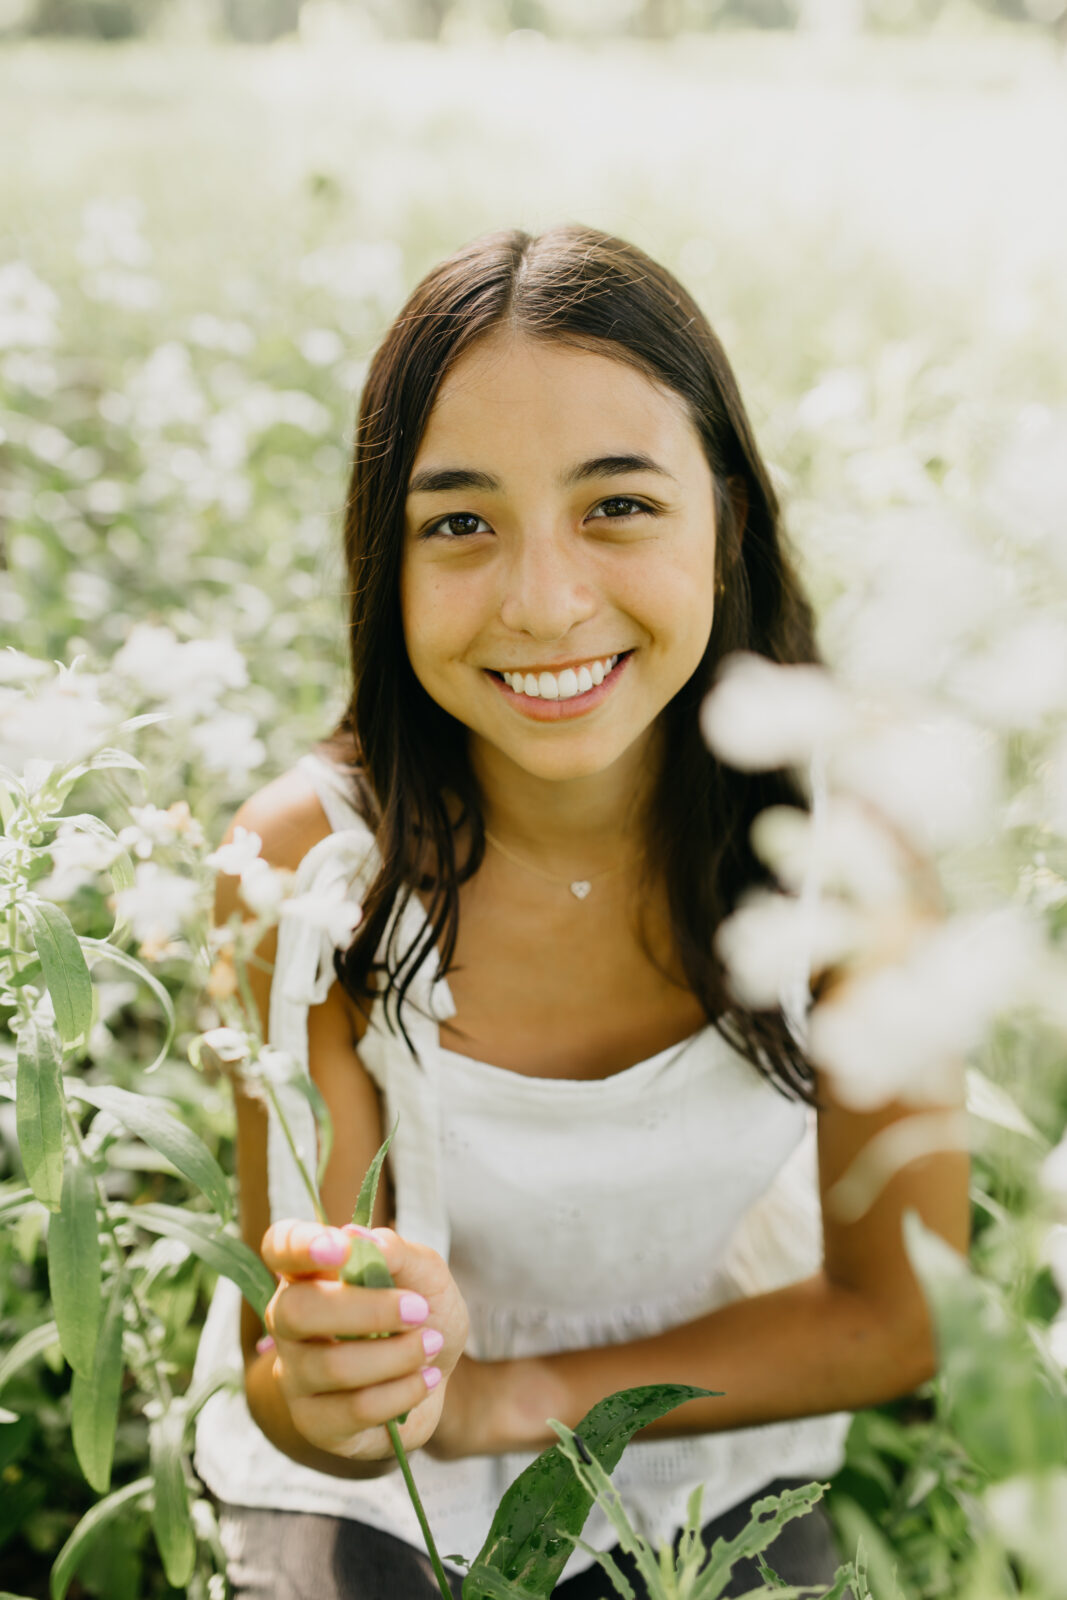 A lovely high school senior being photographed in a field of flowers